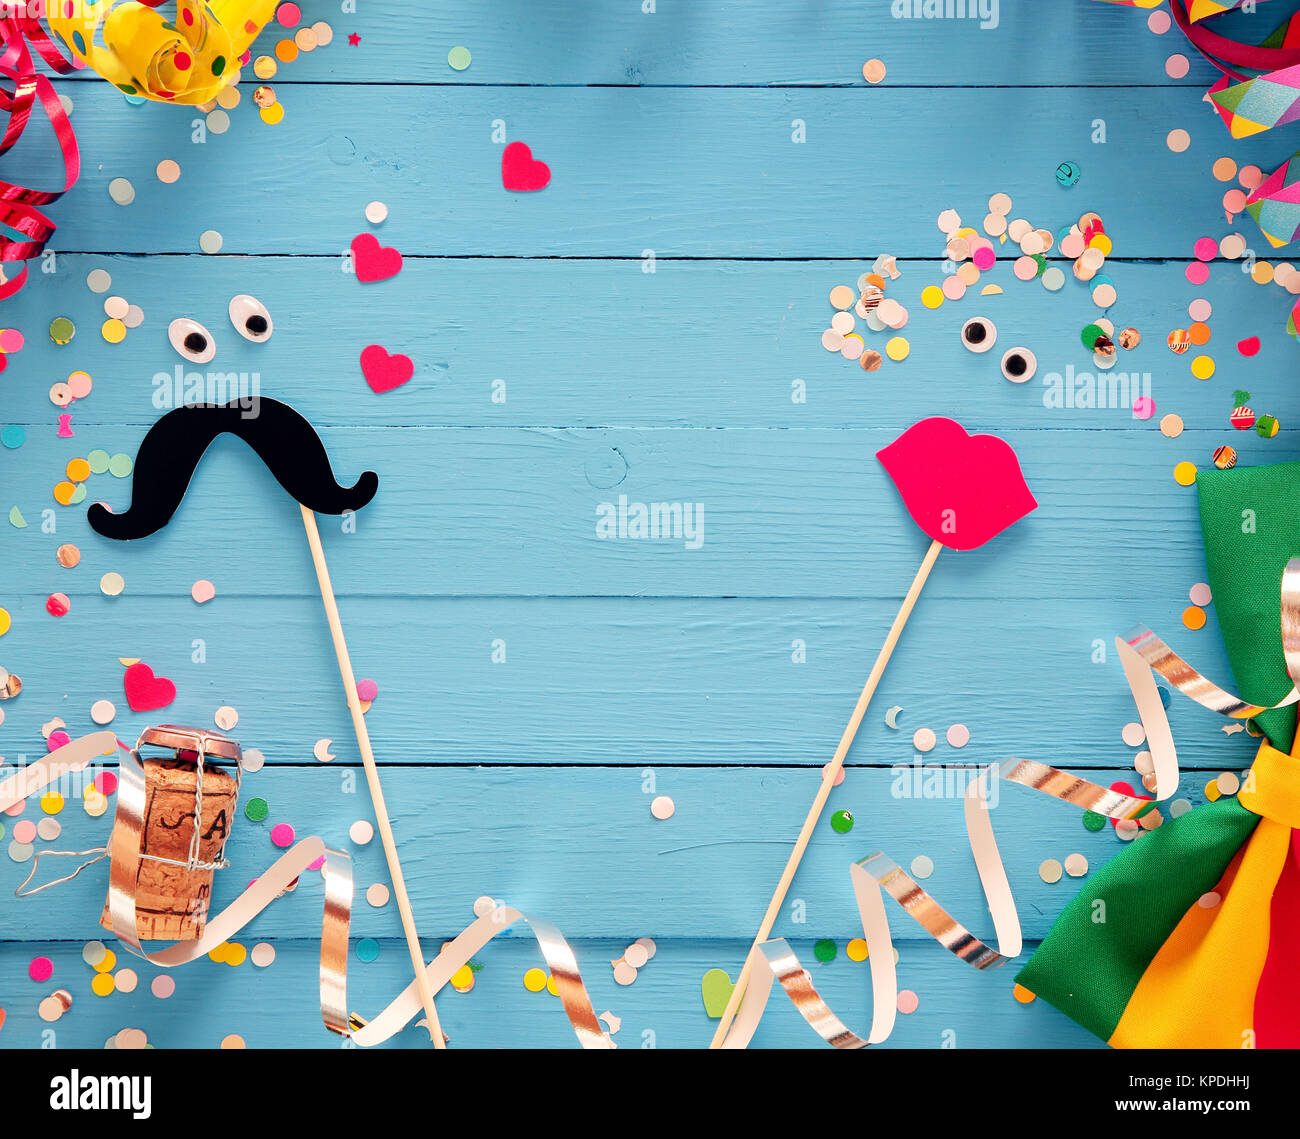 Fun photo booth accessories festive background with a loving couple formed  from a mustache and set of luscious red female lips on rustic blue wooden  boards with a frame of party streamers